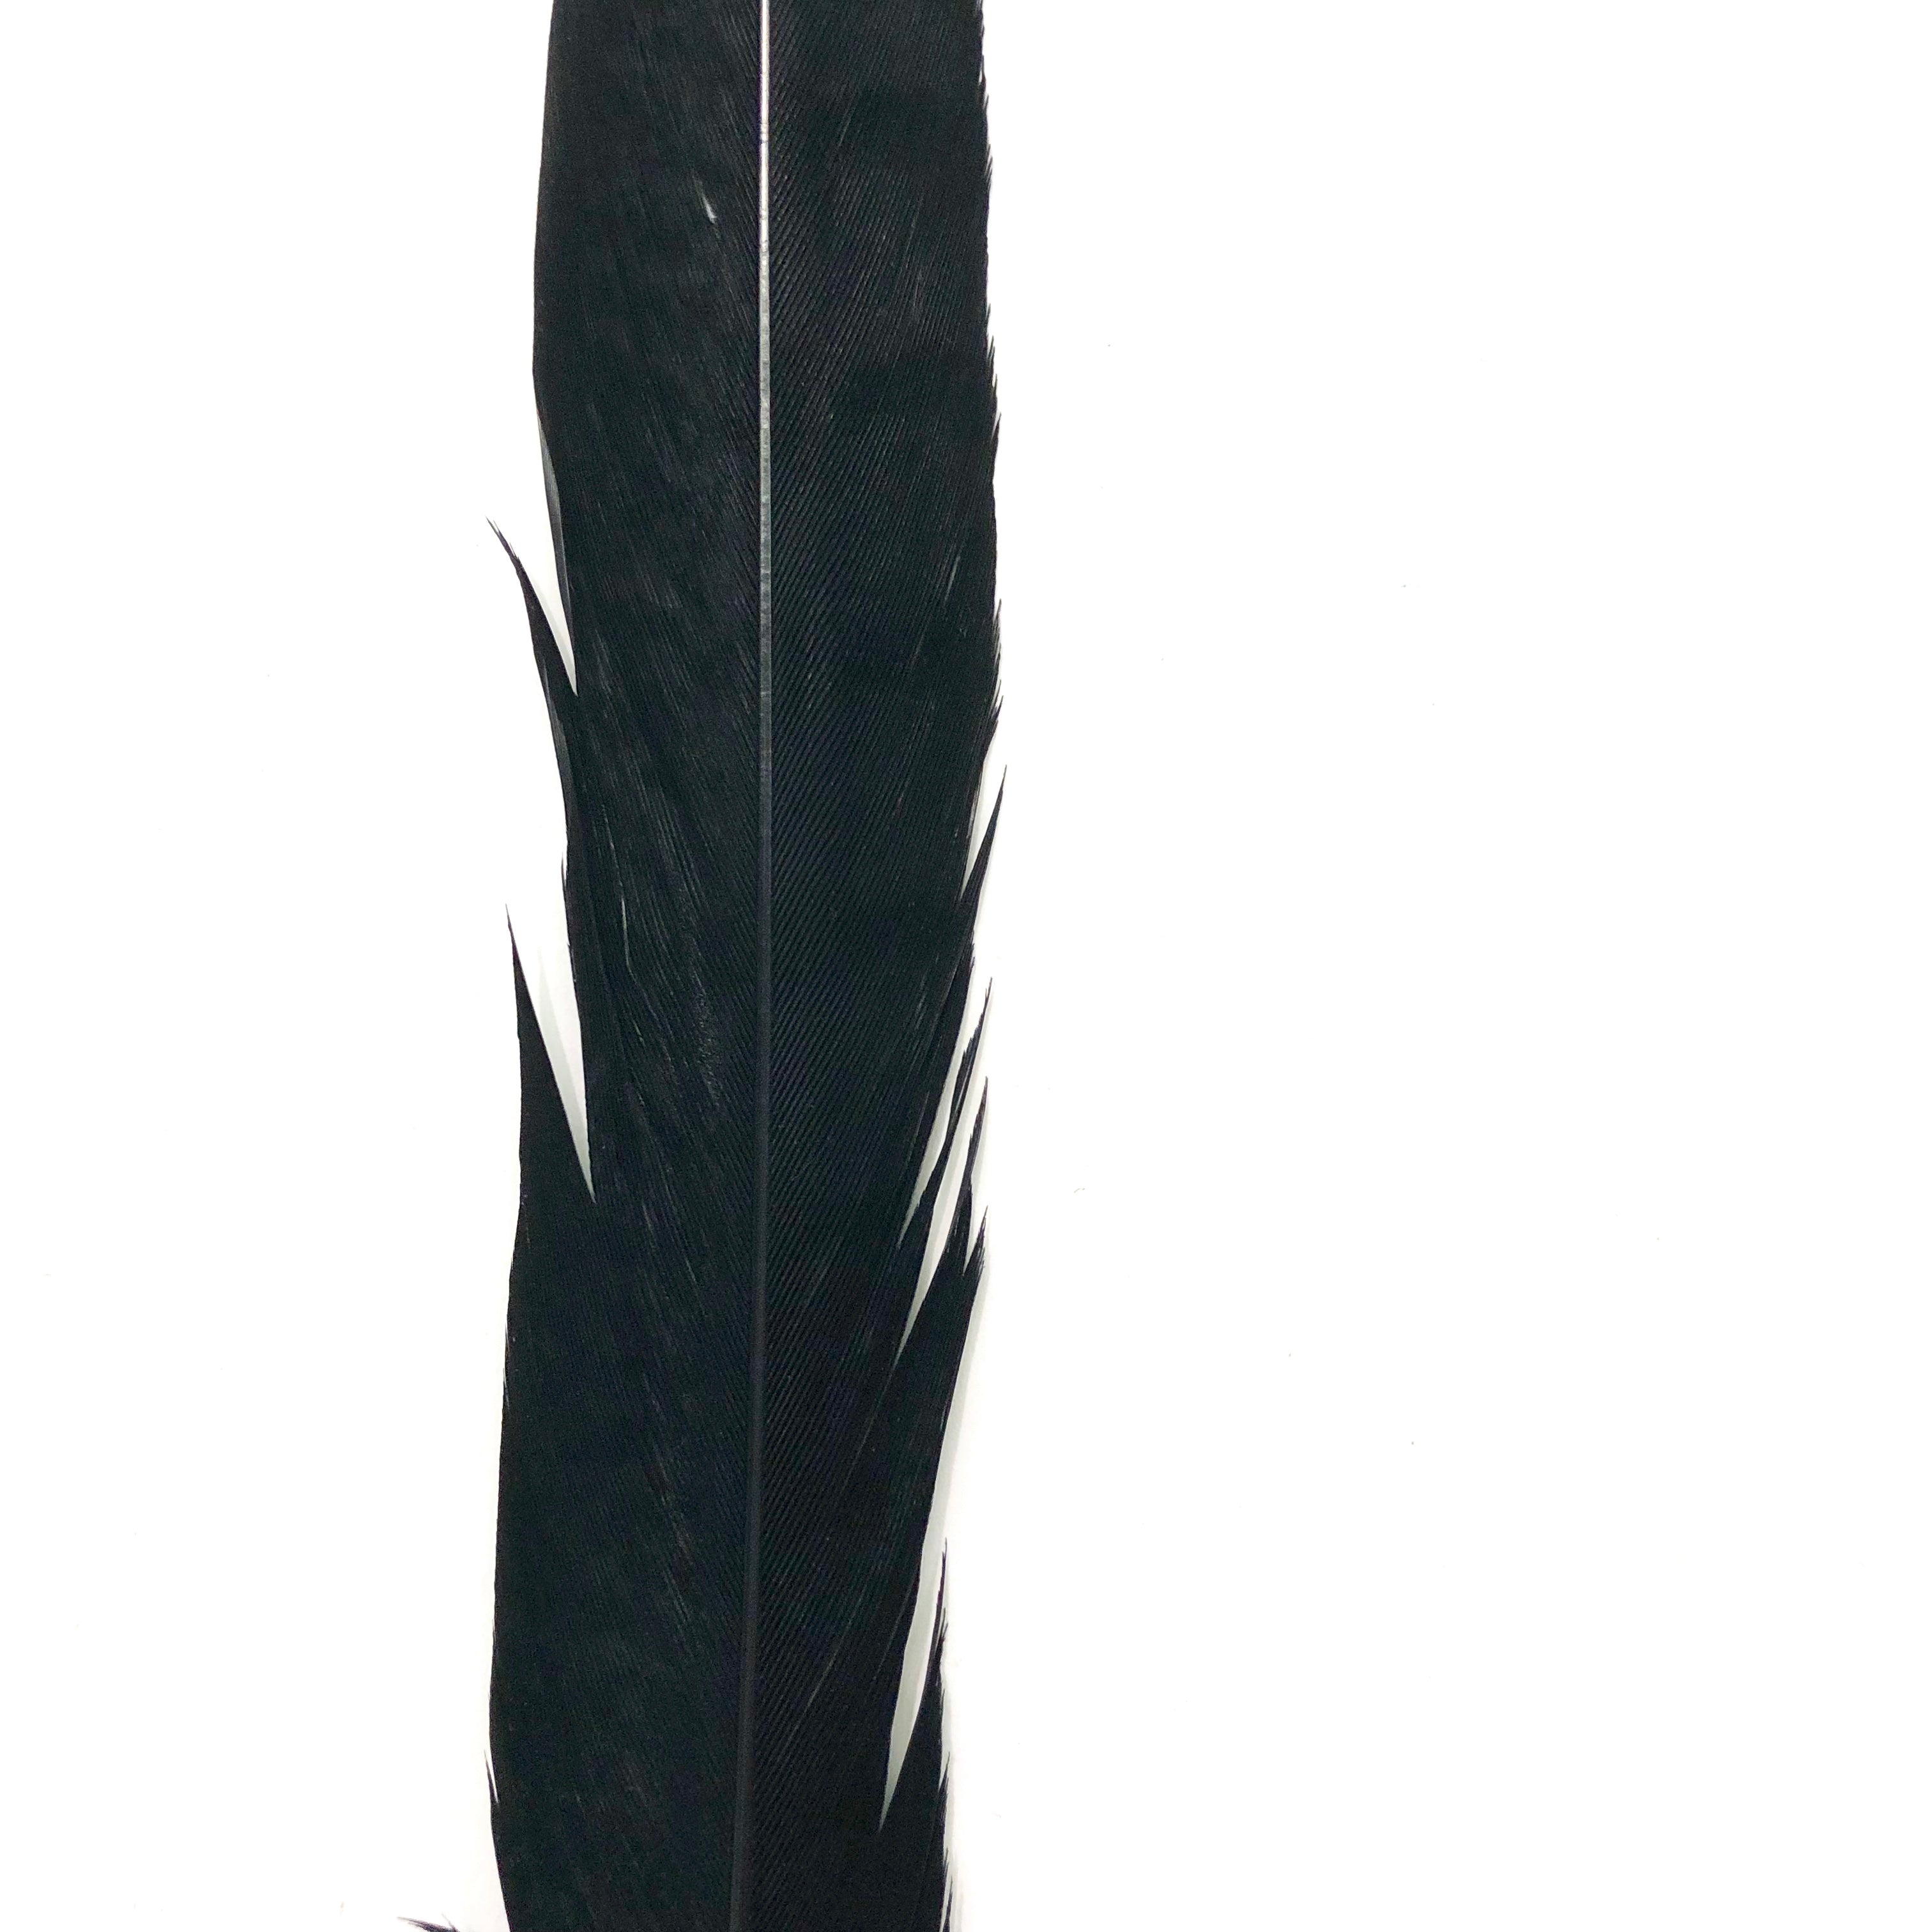 10" to 20" Lady Amherst Pheasant Side Tail Feather - Black